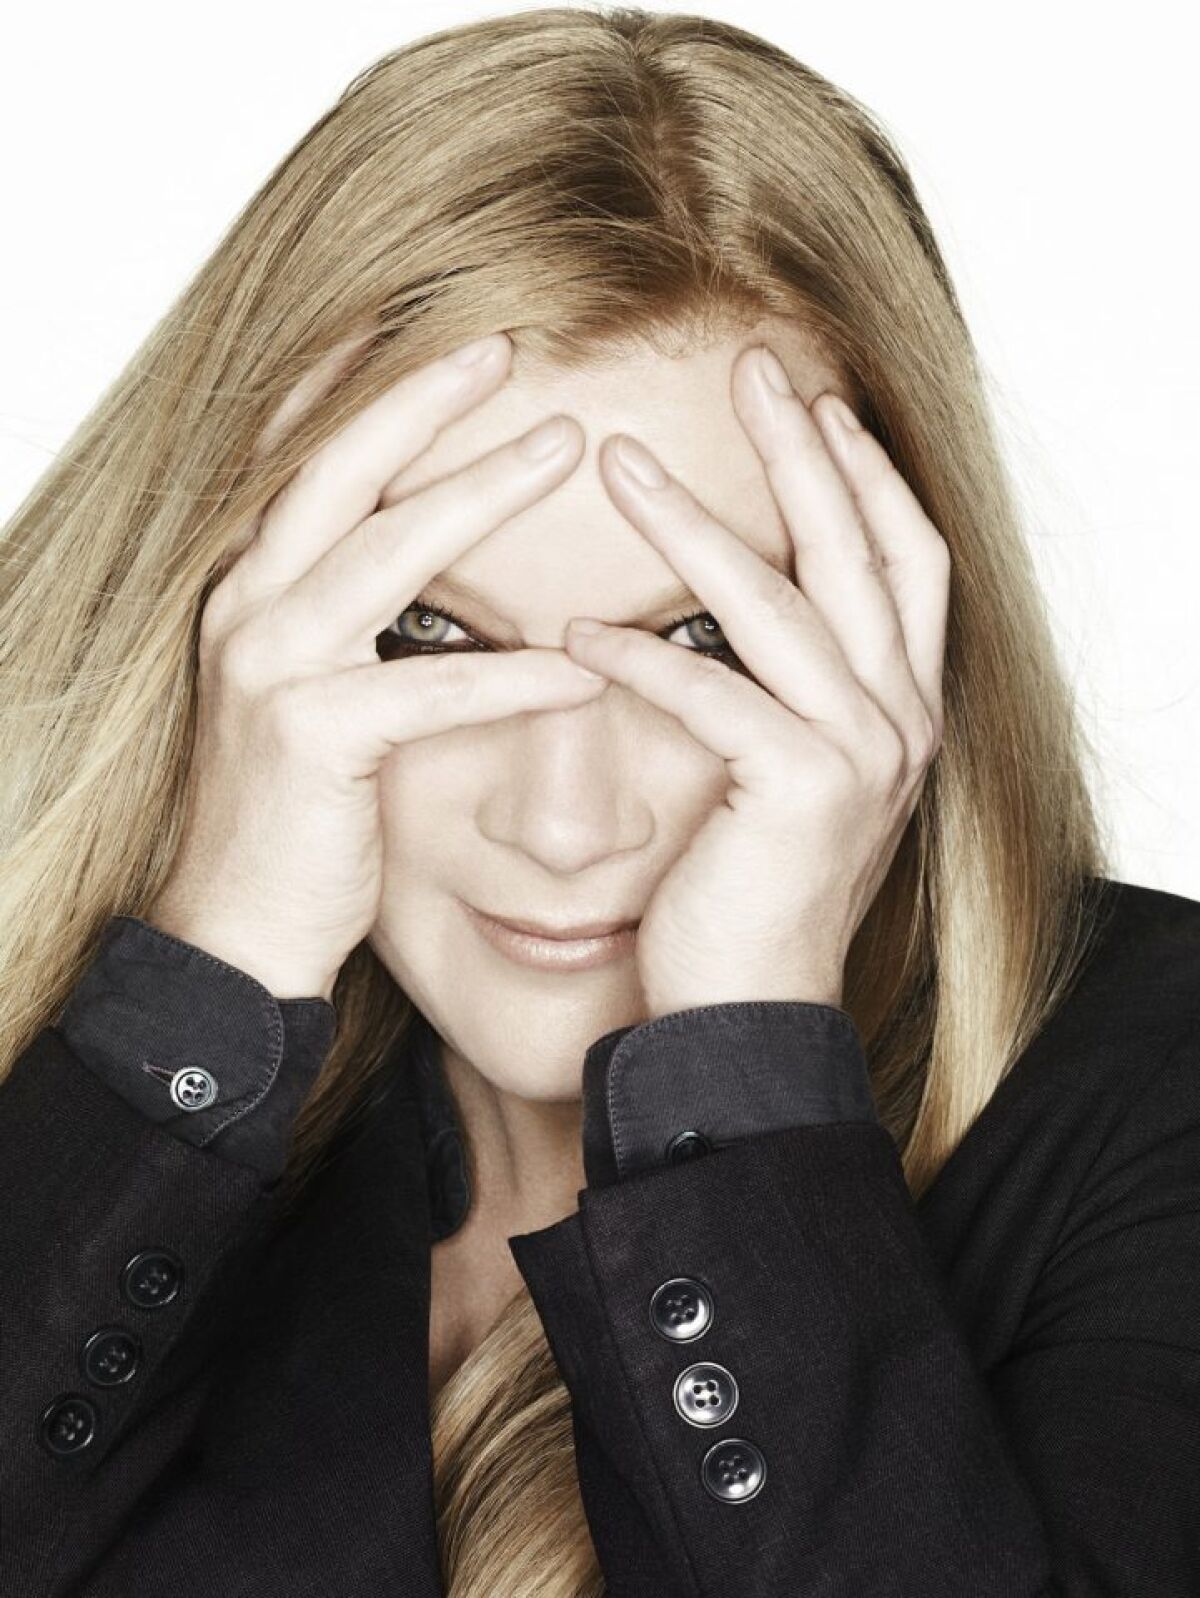 A smiling blond woman partially covers her face with her hands and peeks through her fingers.